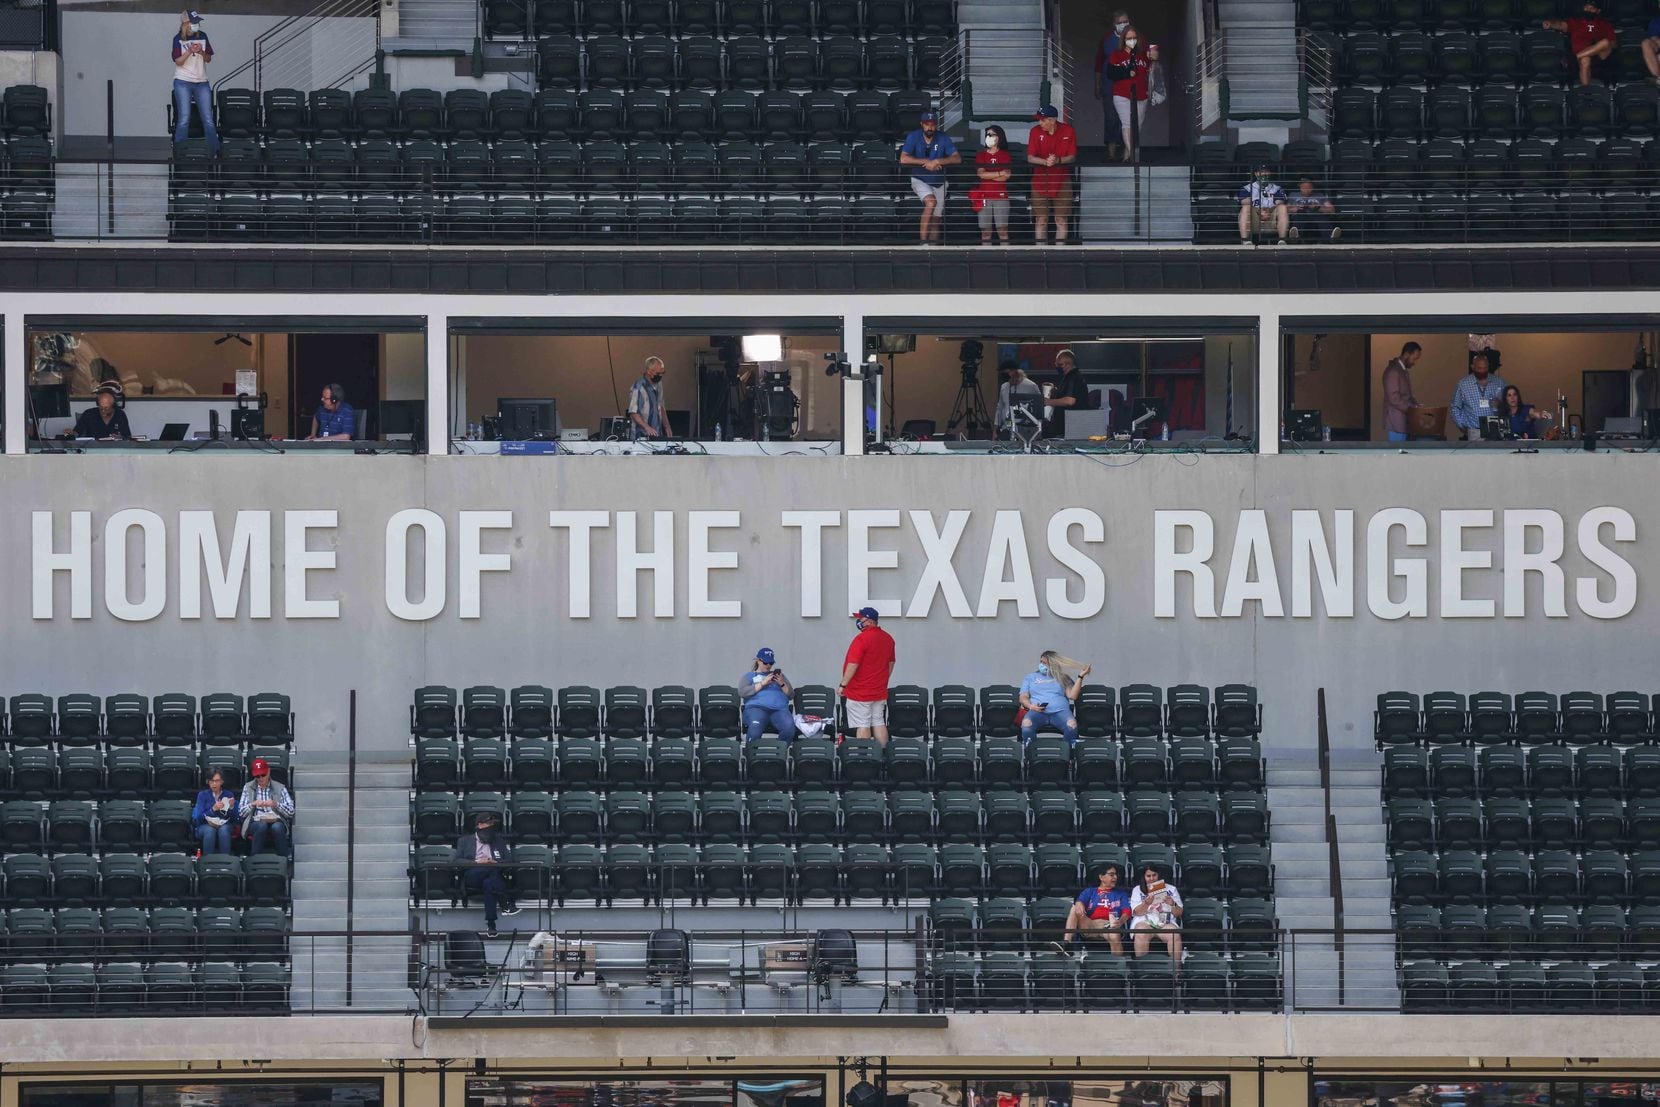 Fans start to arrive to the the Globe Life Field to attend the game between Texas Rangers and Toronto Blue Jays on opening day in Arlington, Texas on Monday, April 5, 2021. (Lola Gomez/The Dallas Morning News)